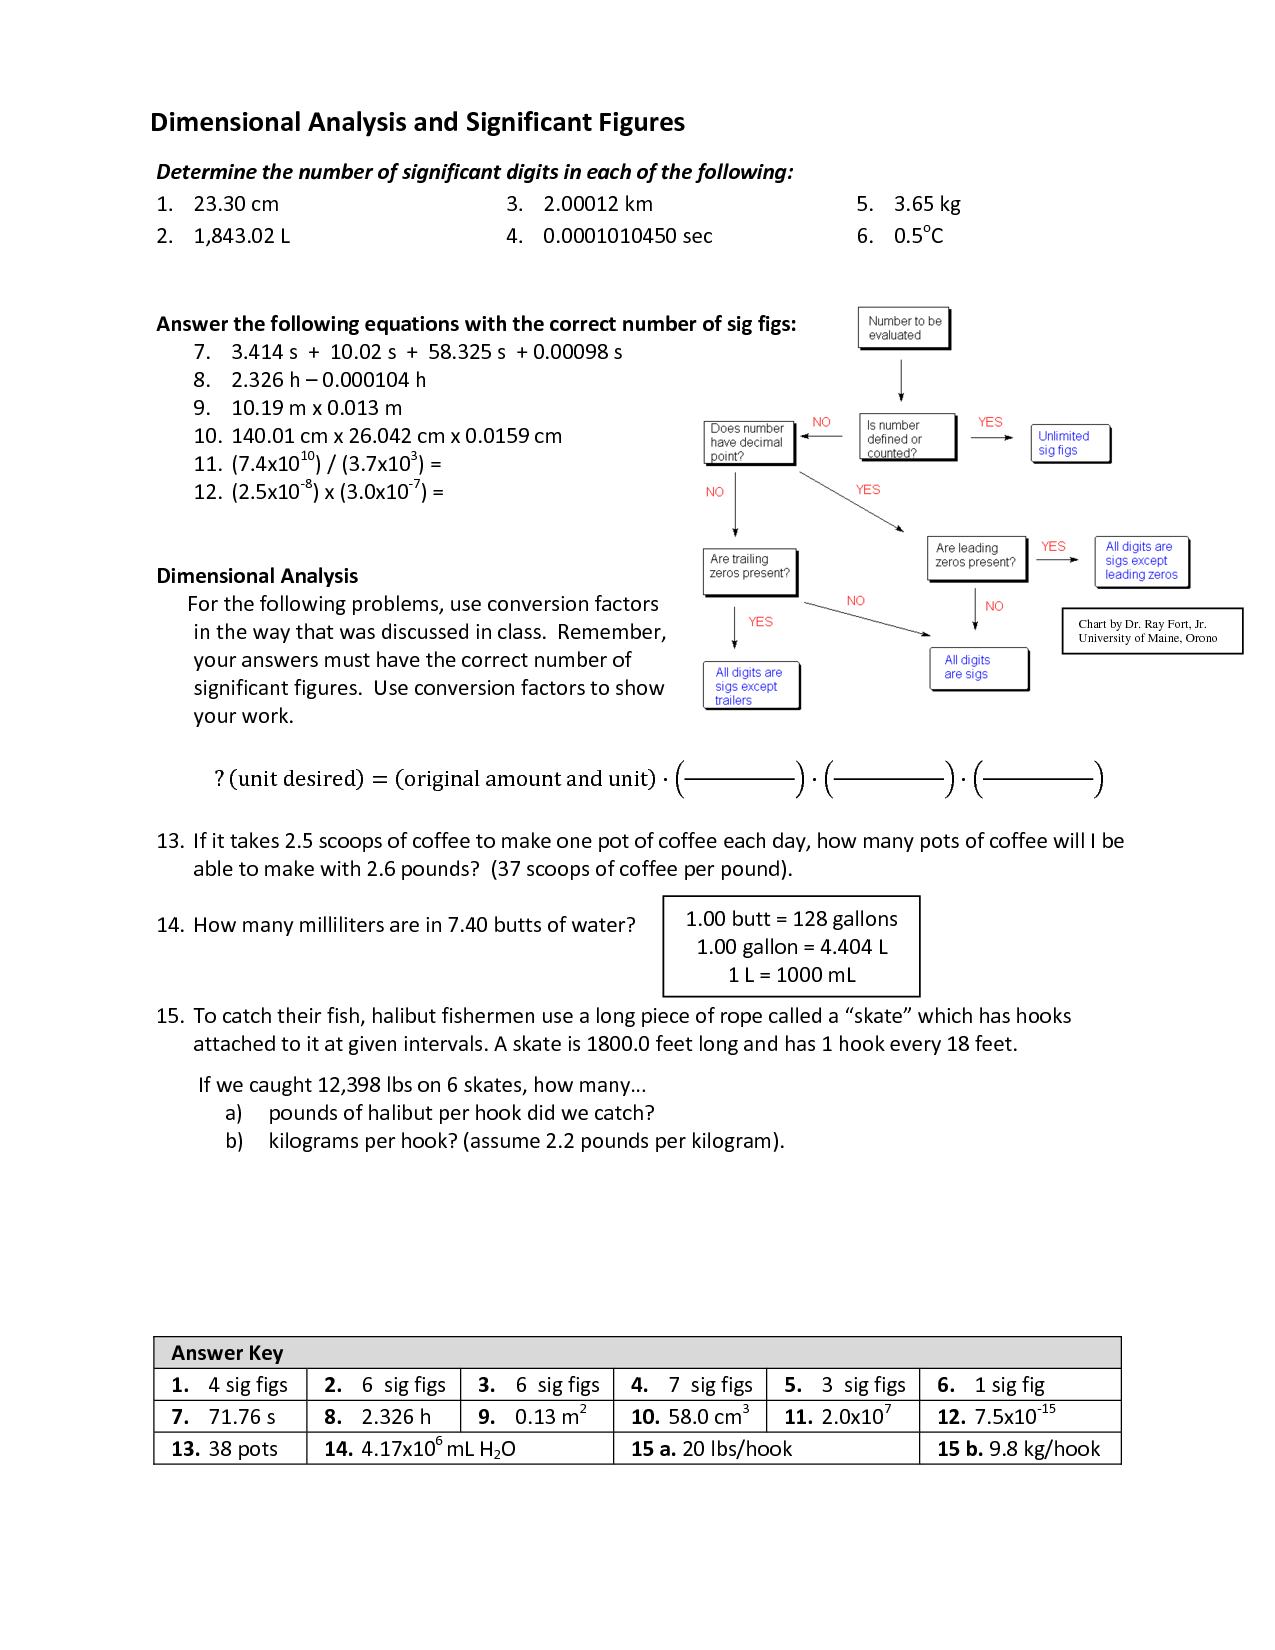 Dimensional Analysis Practice Problems Answers Image